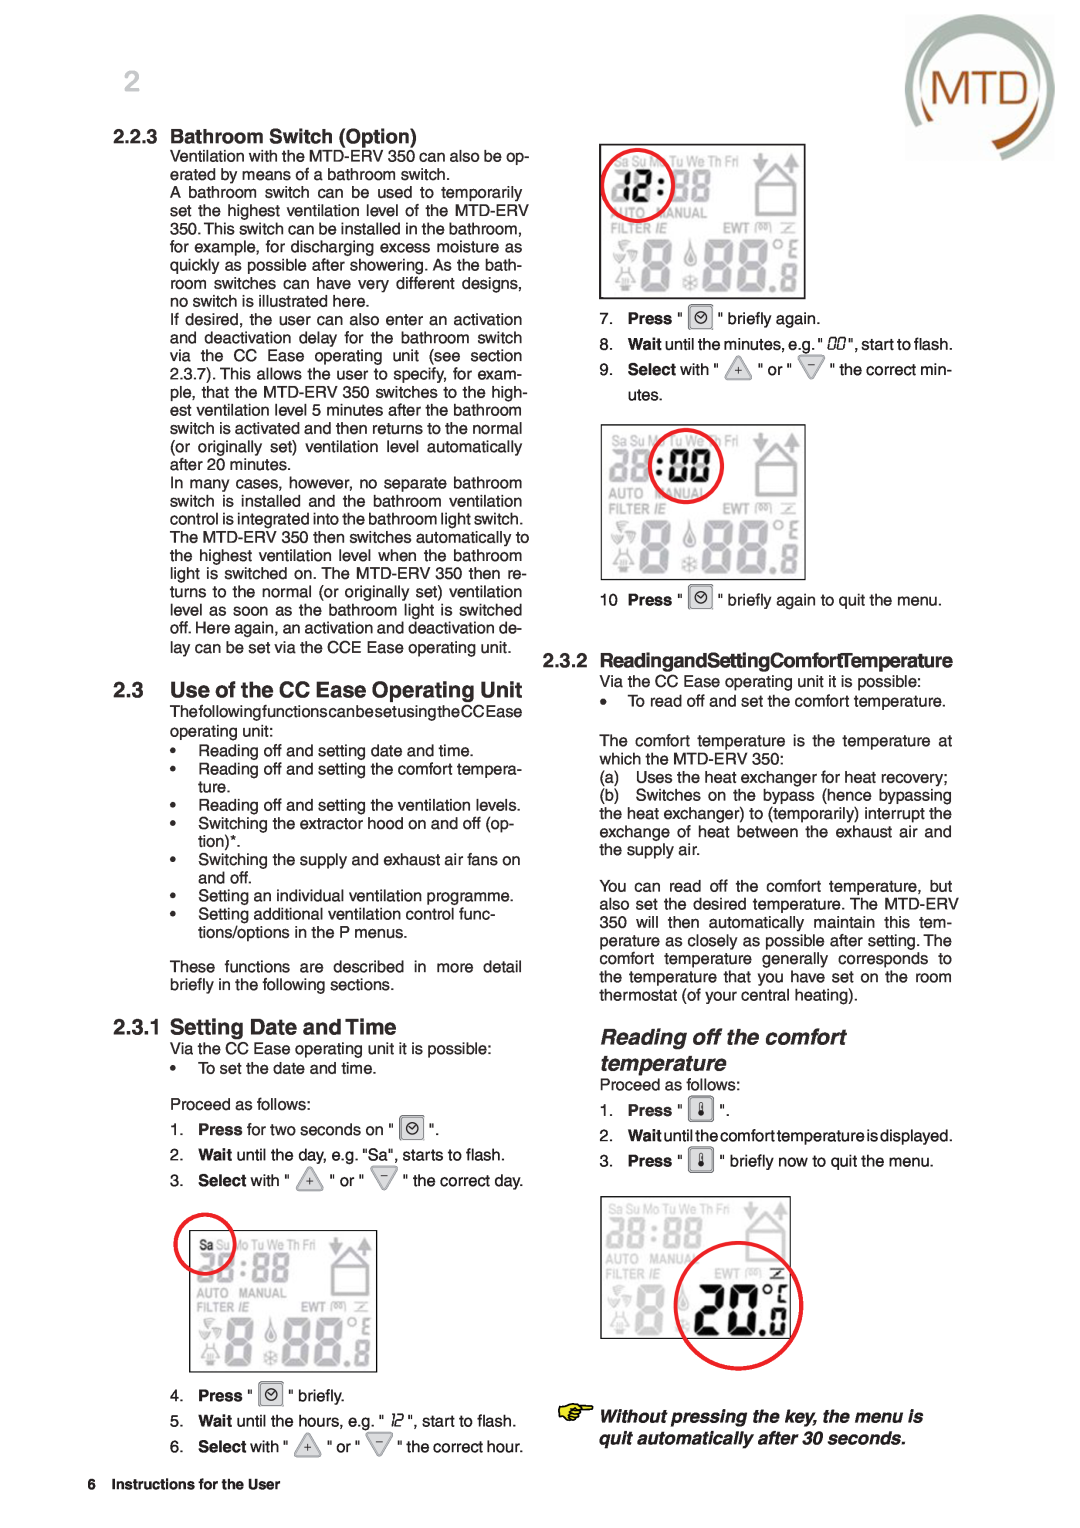 MTD ERV 365, ERV 350 manual Use of the CC Ease Operating Unit, Setting Date and Time, Reading off the comfort temperature 